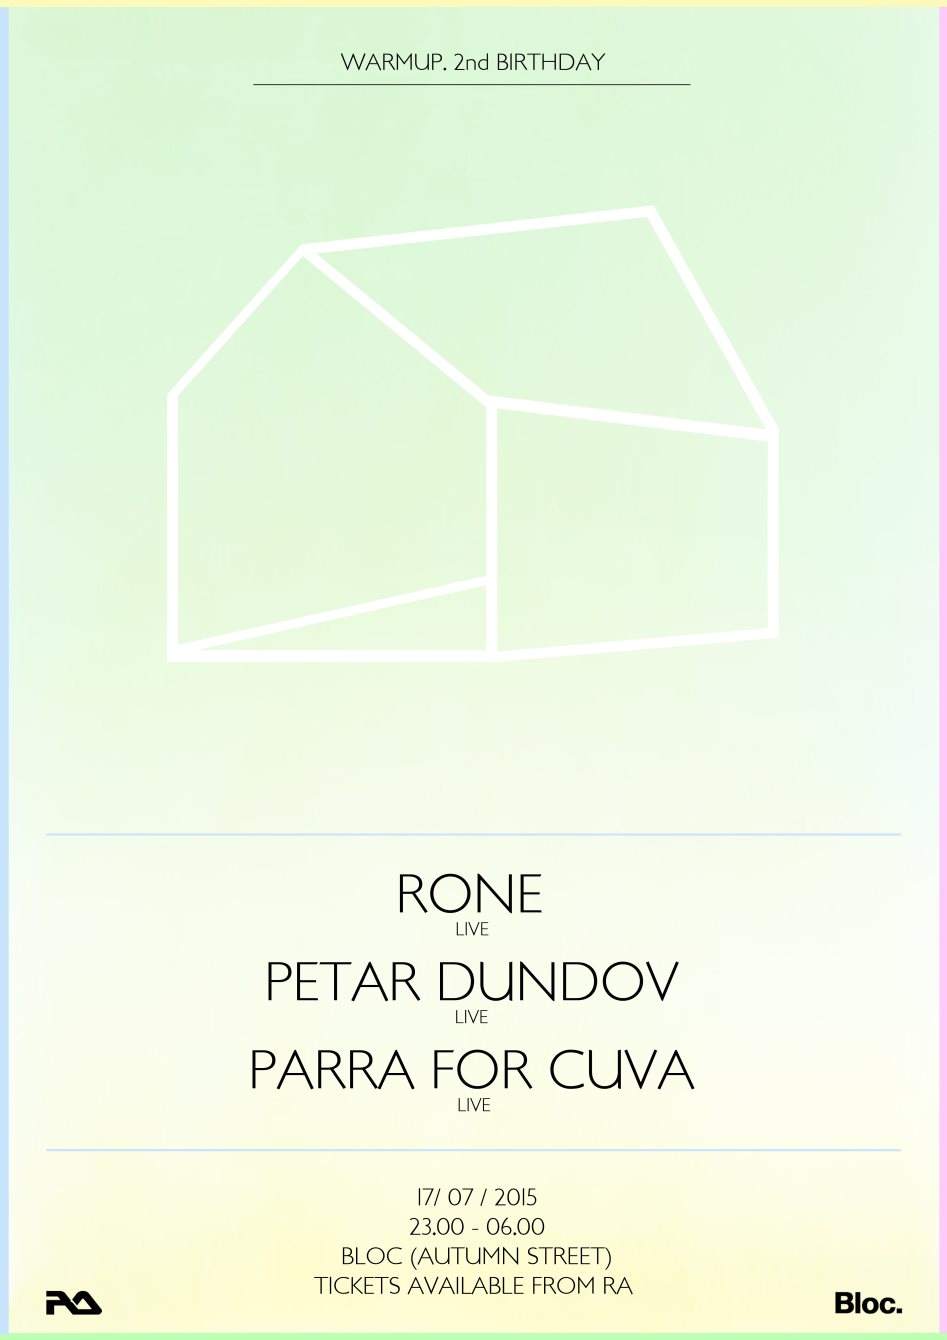 Warm Up 2nd Birthday with Rone (Live) Parra for Cuva (Live) & Petar Dundov (Live) - Página frontal